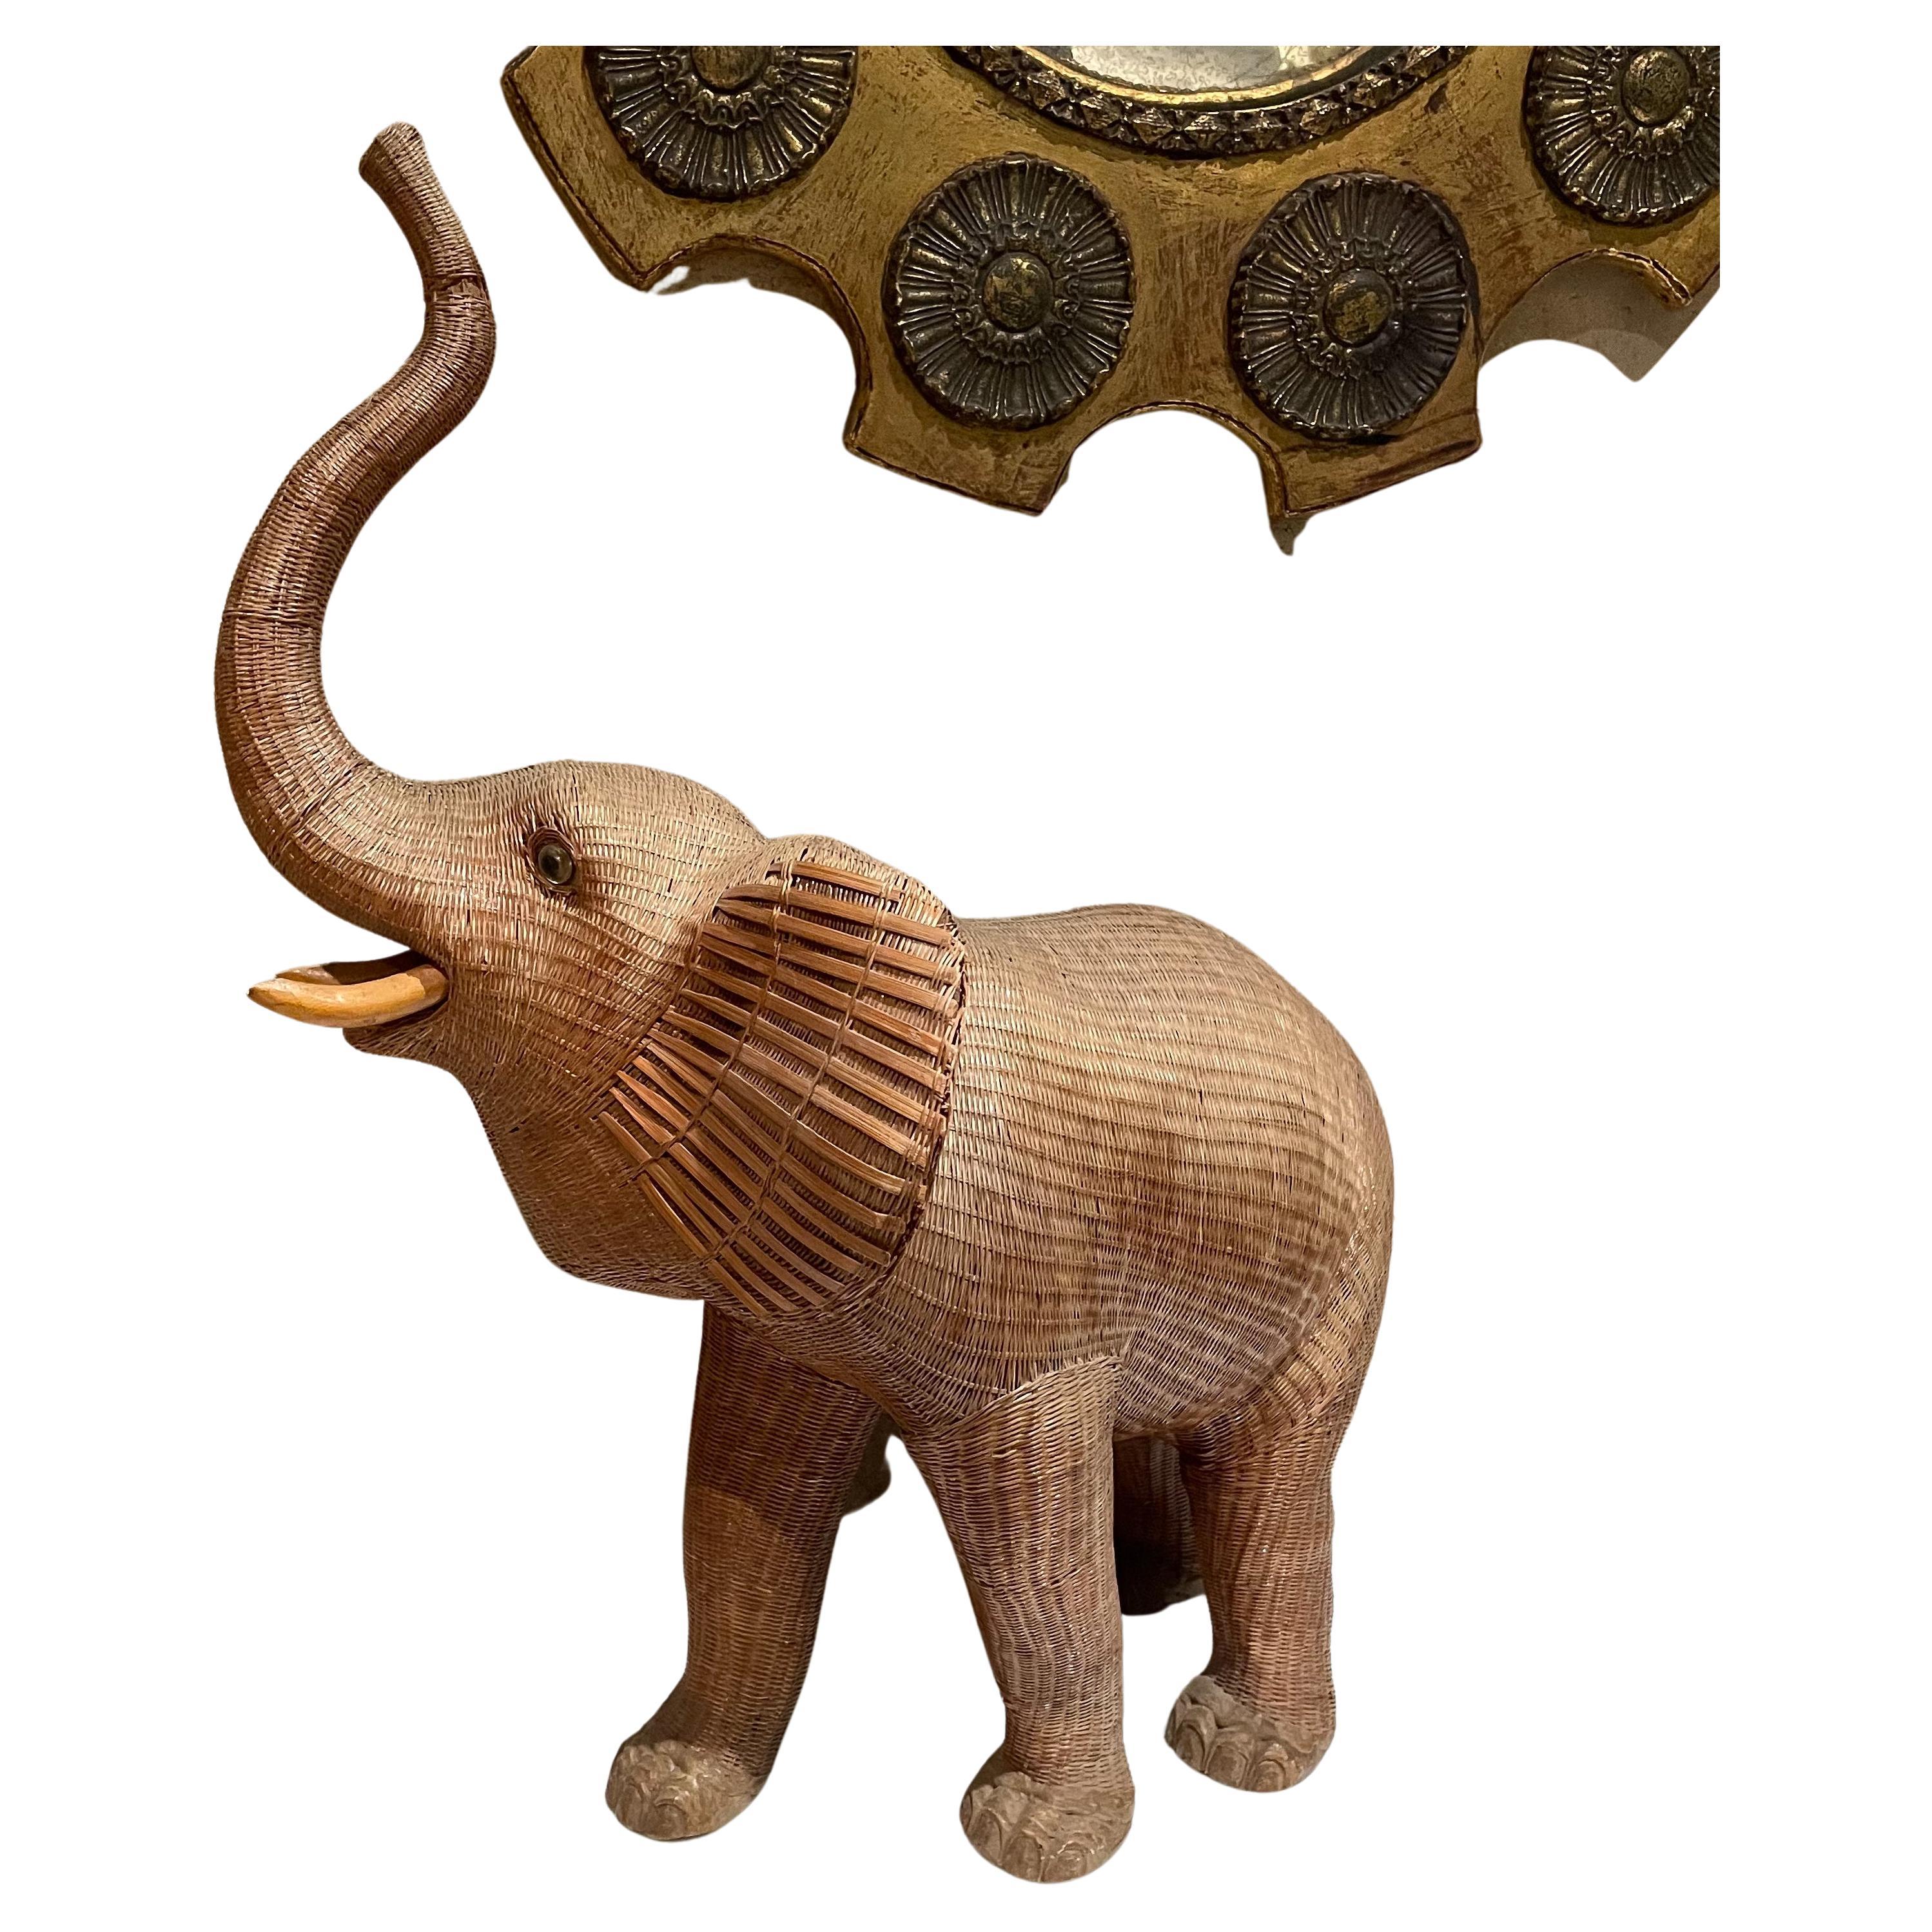 Sculptural Elephant Stash Box
Antique Elephant Wicker Box Hollywood Regency Period style similar to Mario Lopez Torres
Unknown maker. 
The elephant's head can be removed to open the secret stash box.
Dimensions: 20